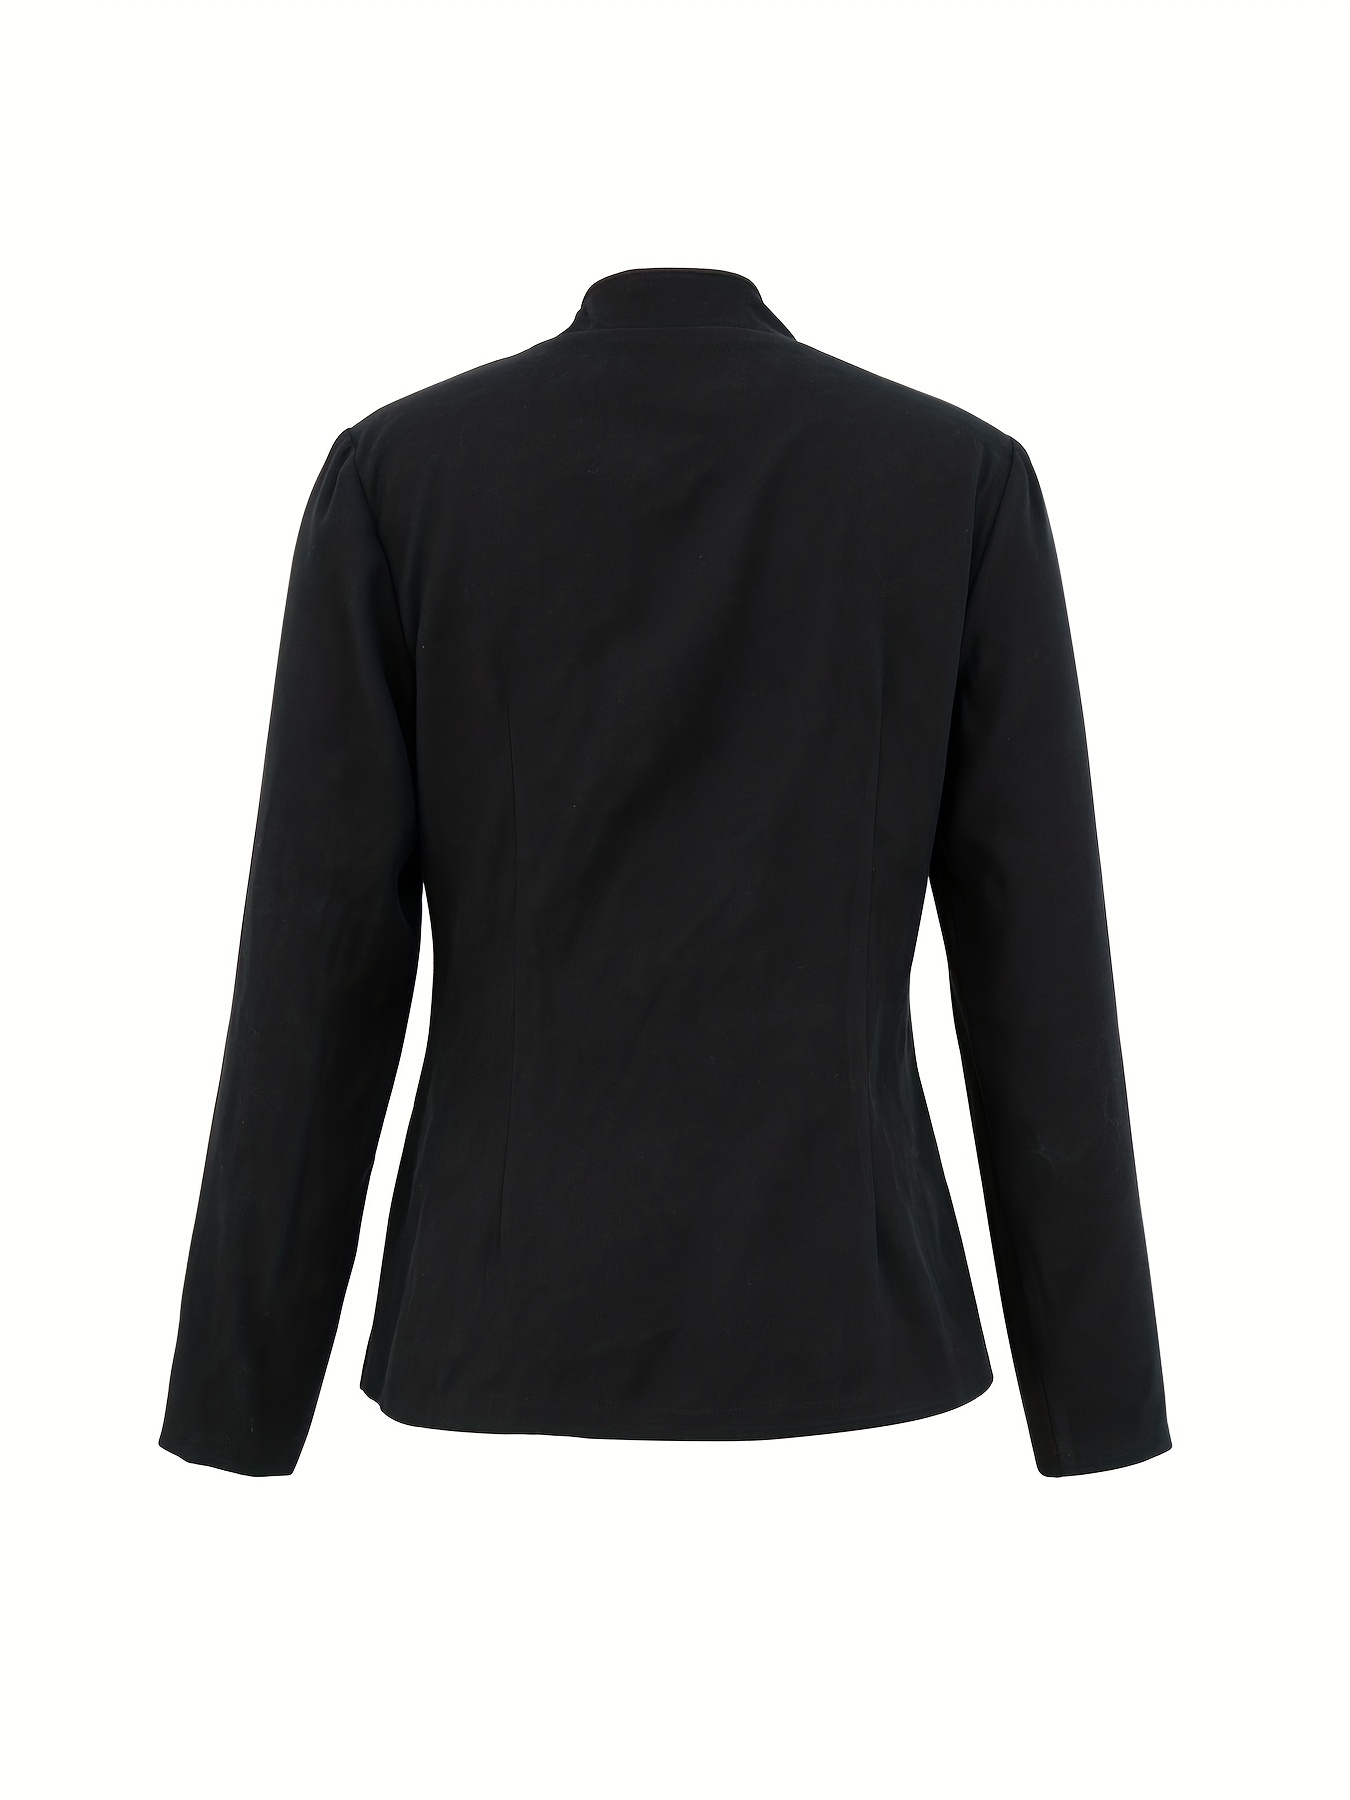 Solid Open Front Blazer, Casual Long Sleeve Work Office Outerwear With Buttons, Women’s Clothing